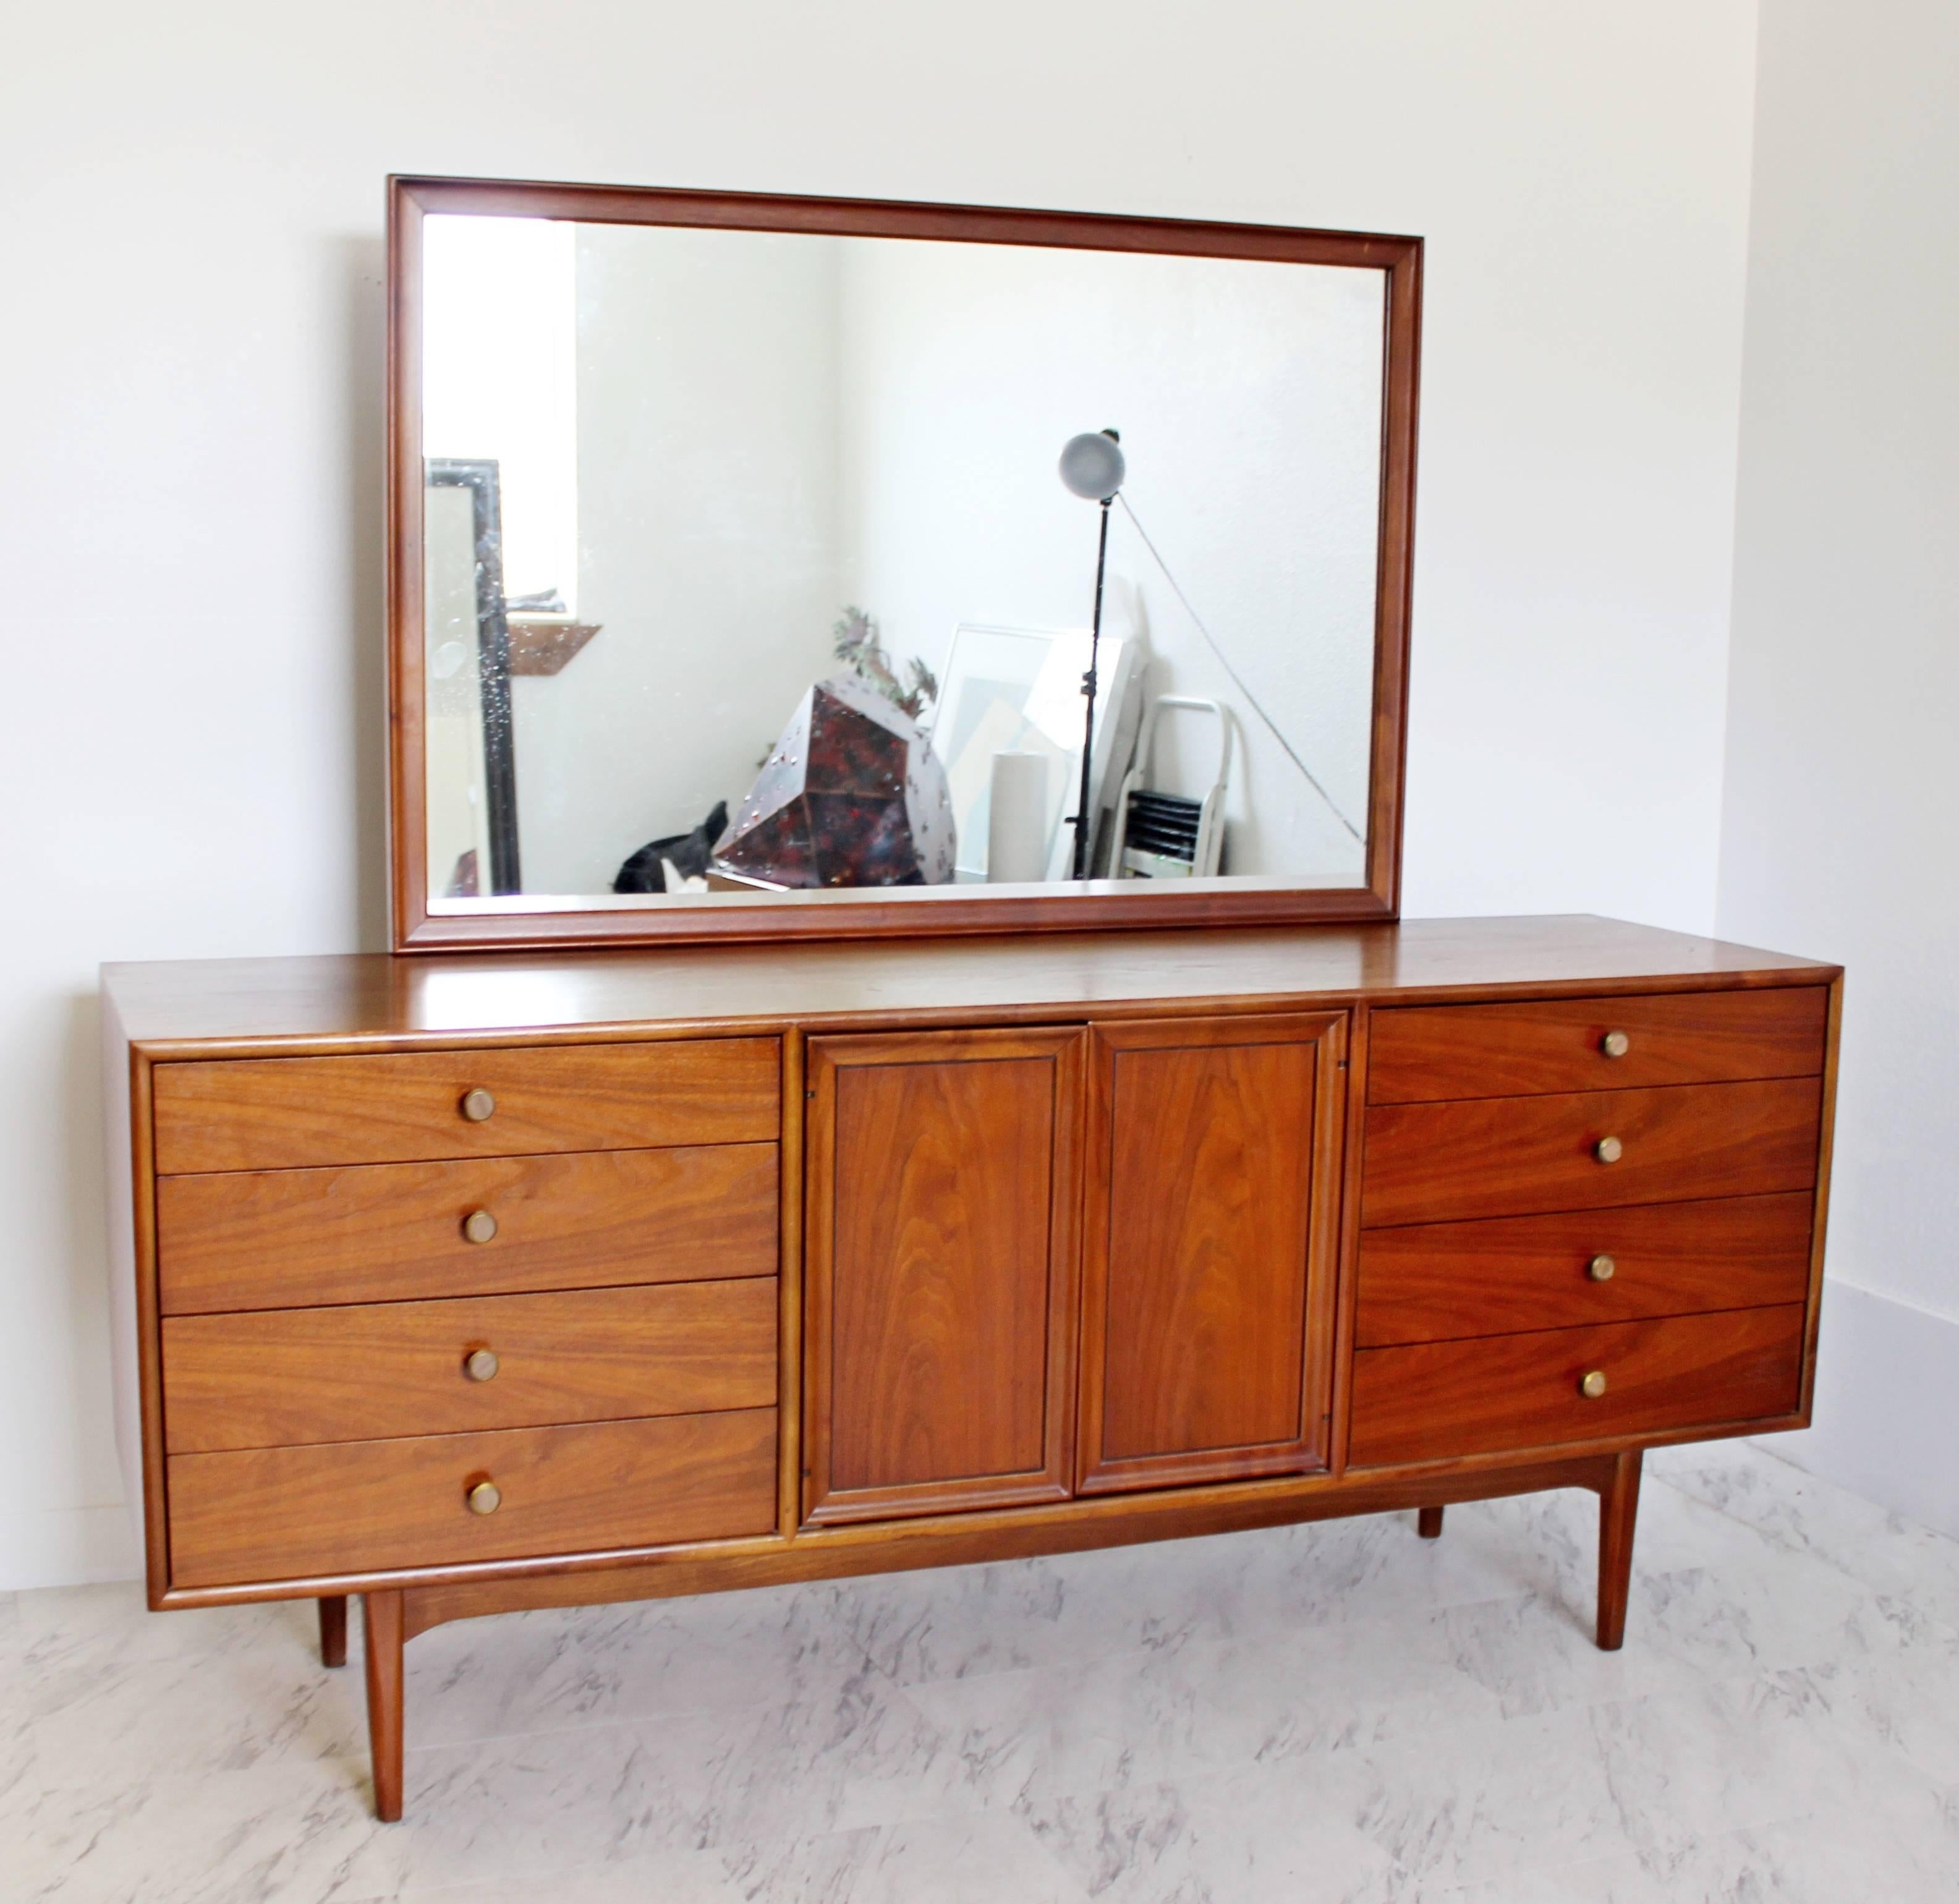 For your consideration is a stunning, walnut lowboy, with an attached mirror and brass and wood knobs on its eight outer drawers, designed by Kipp Stewart for Drexel, Declaration, circa 1965. In excellent condition. The dimensions are 72